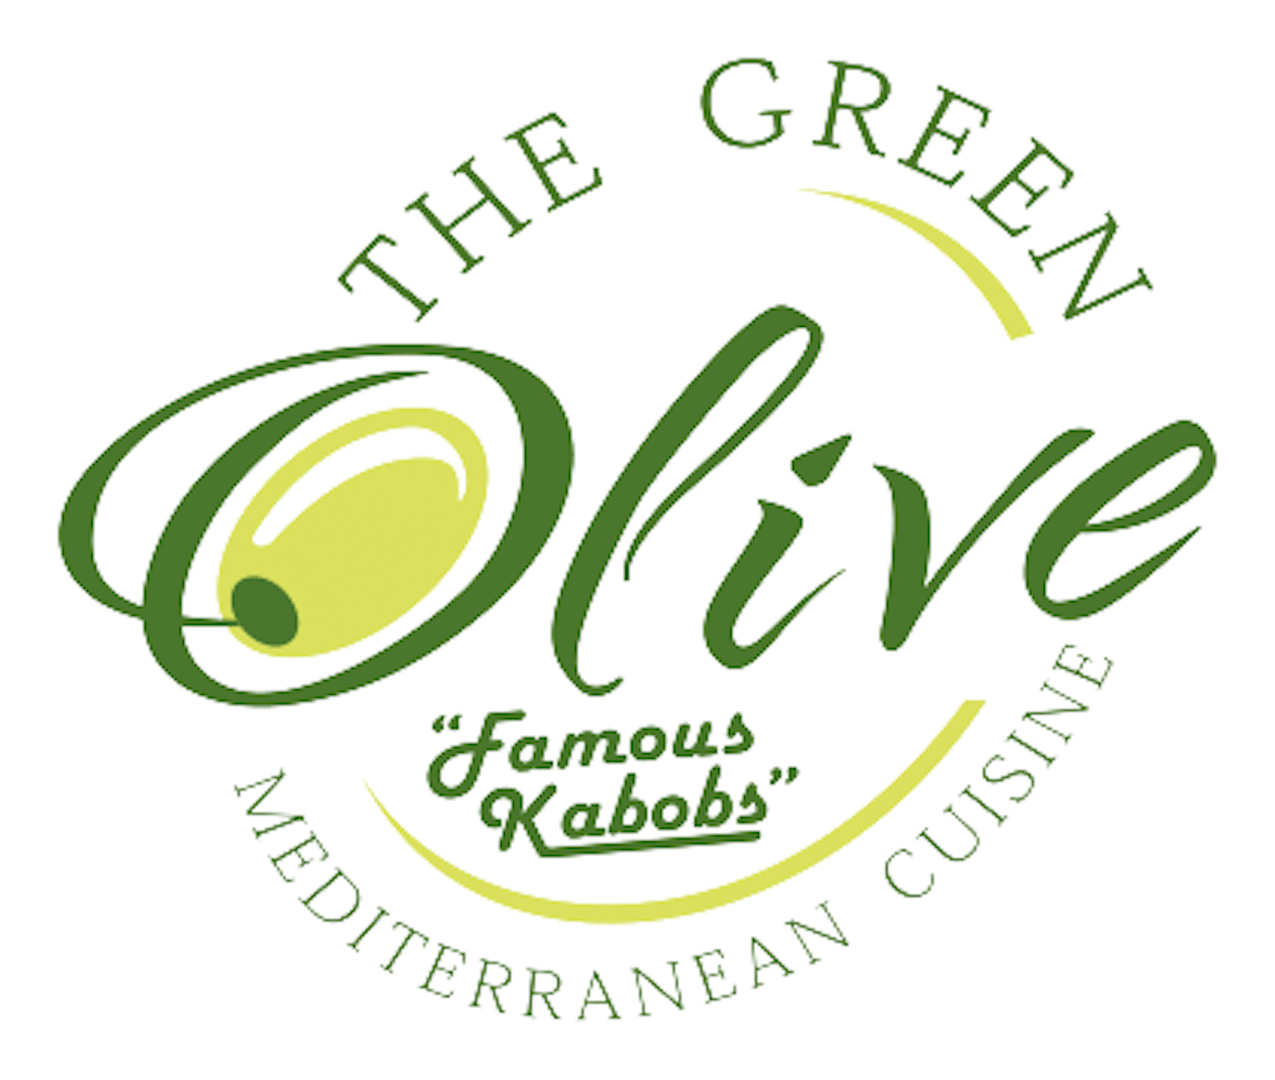 THE GREEN OLIVE COMPTON